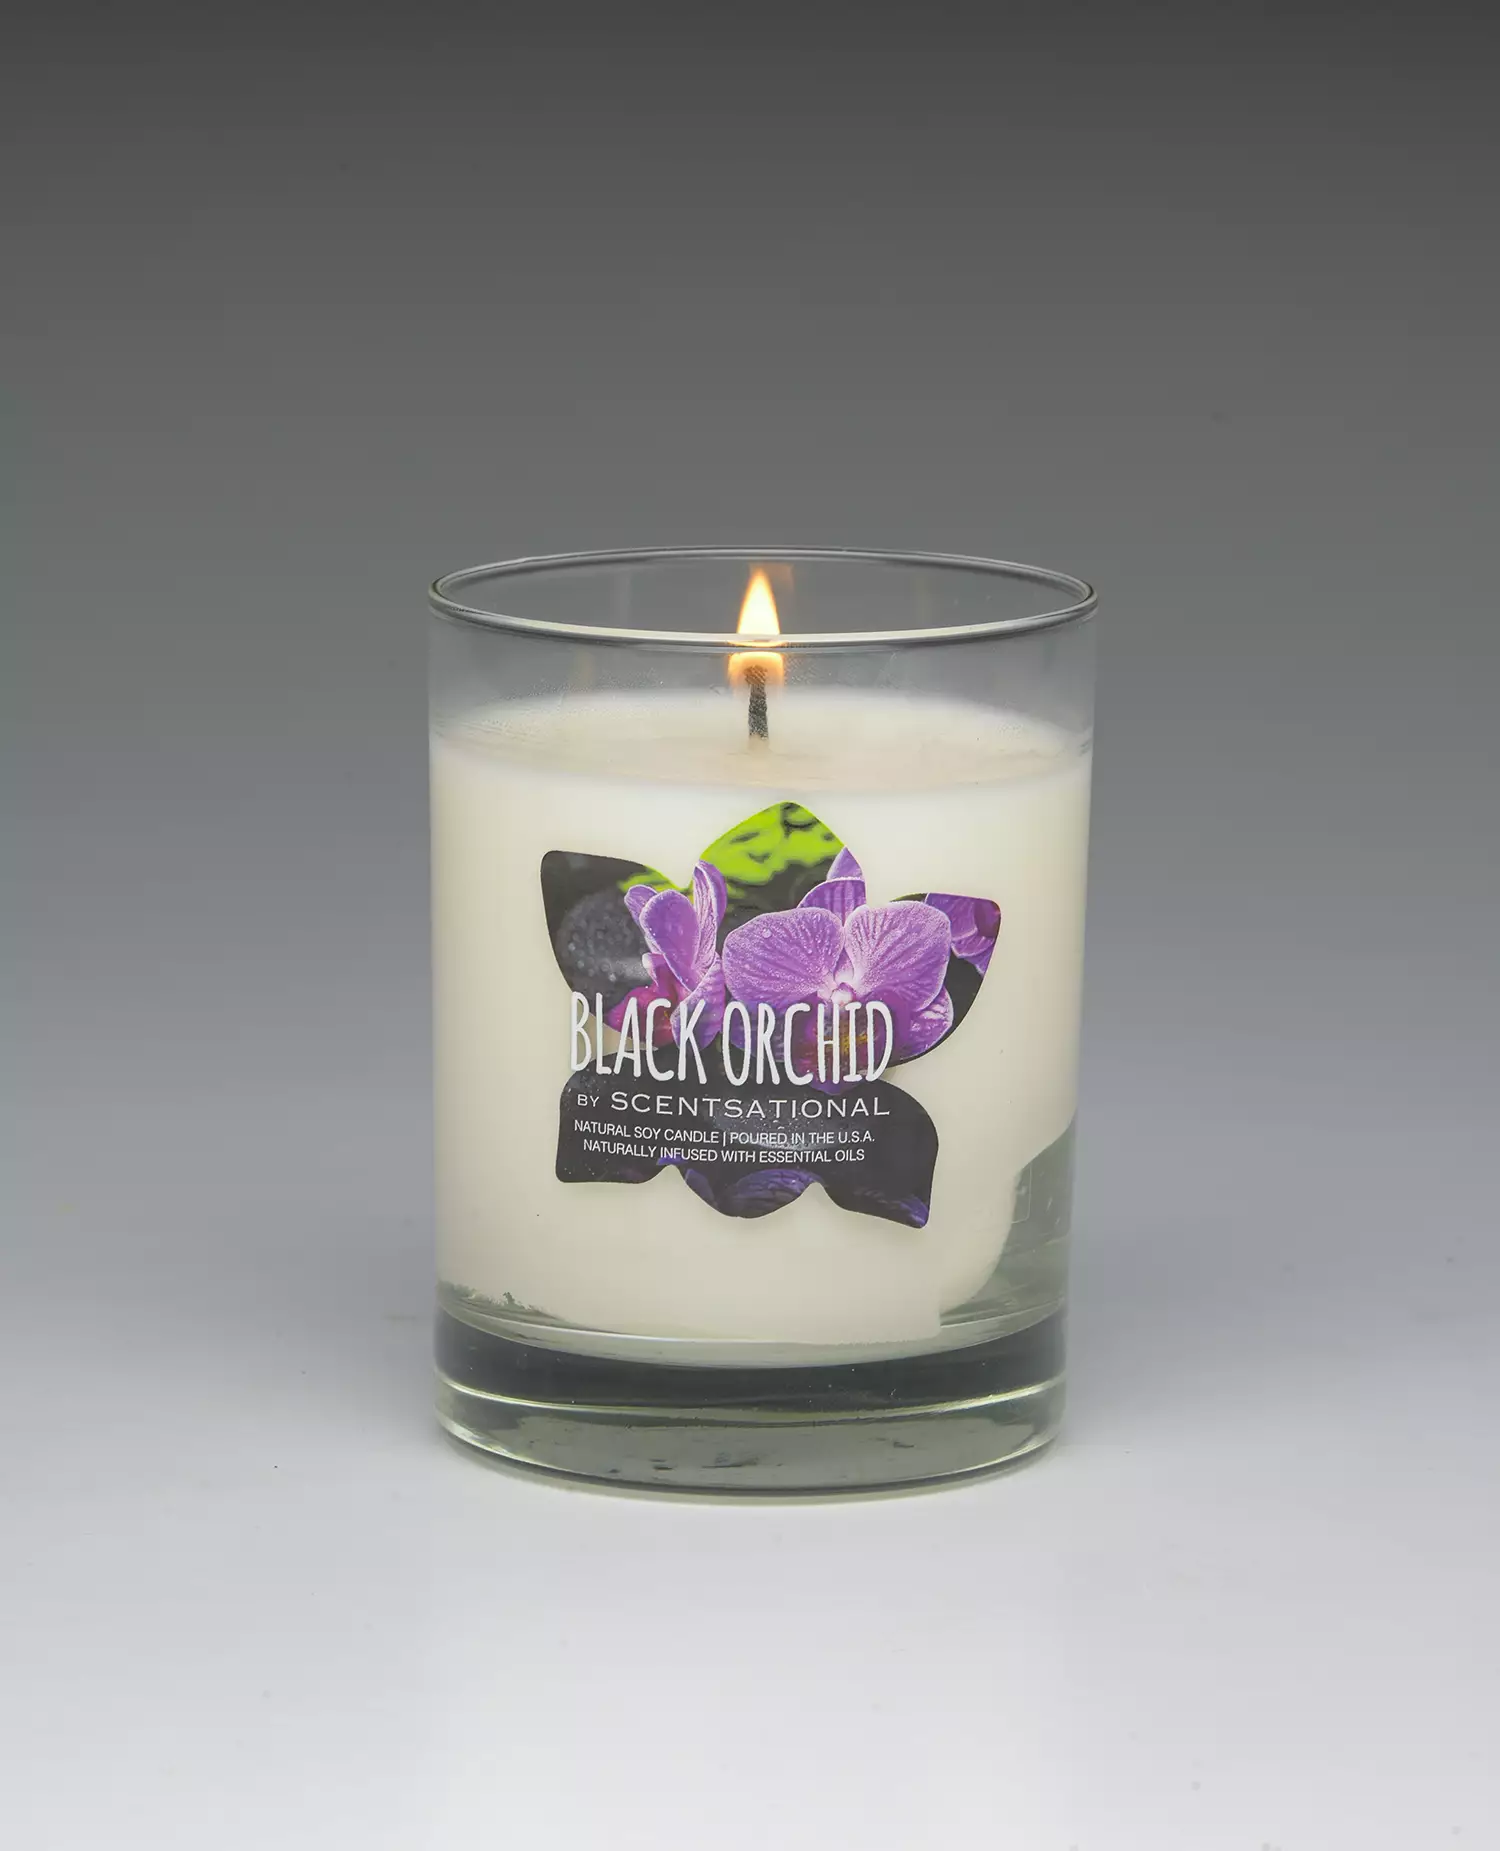 Black Orchid – 11oz scented candle burning